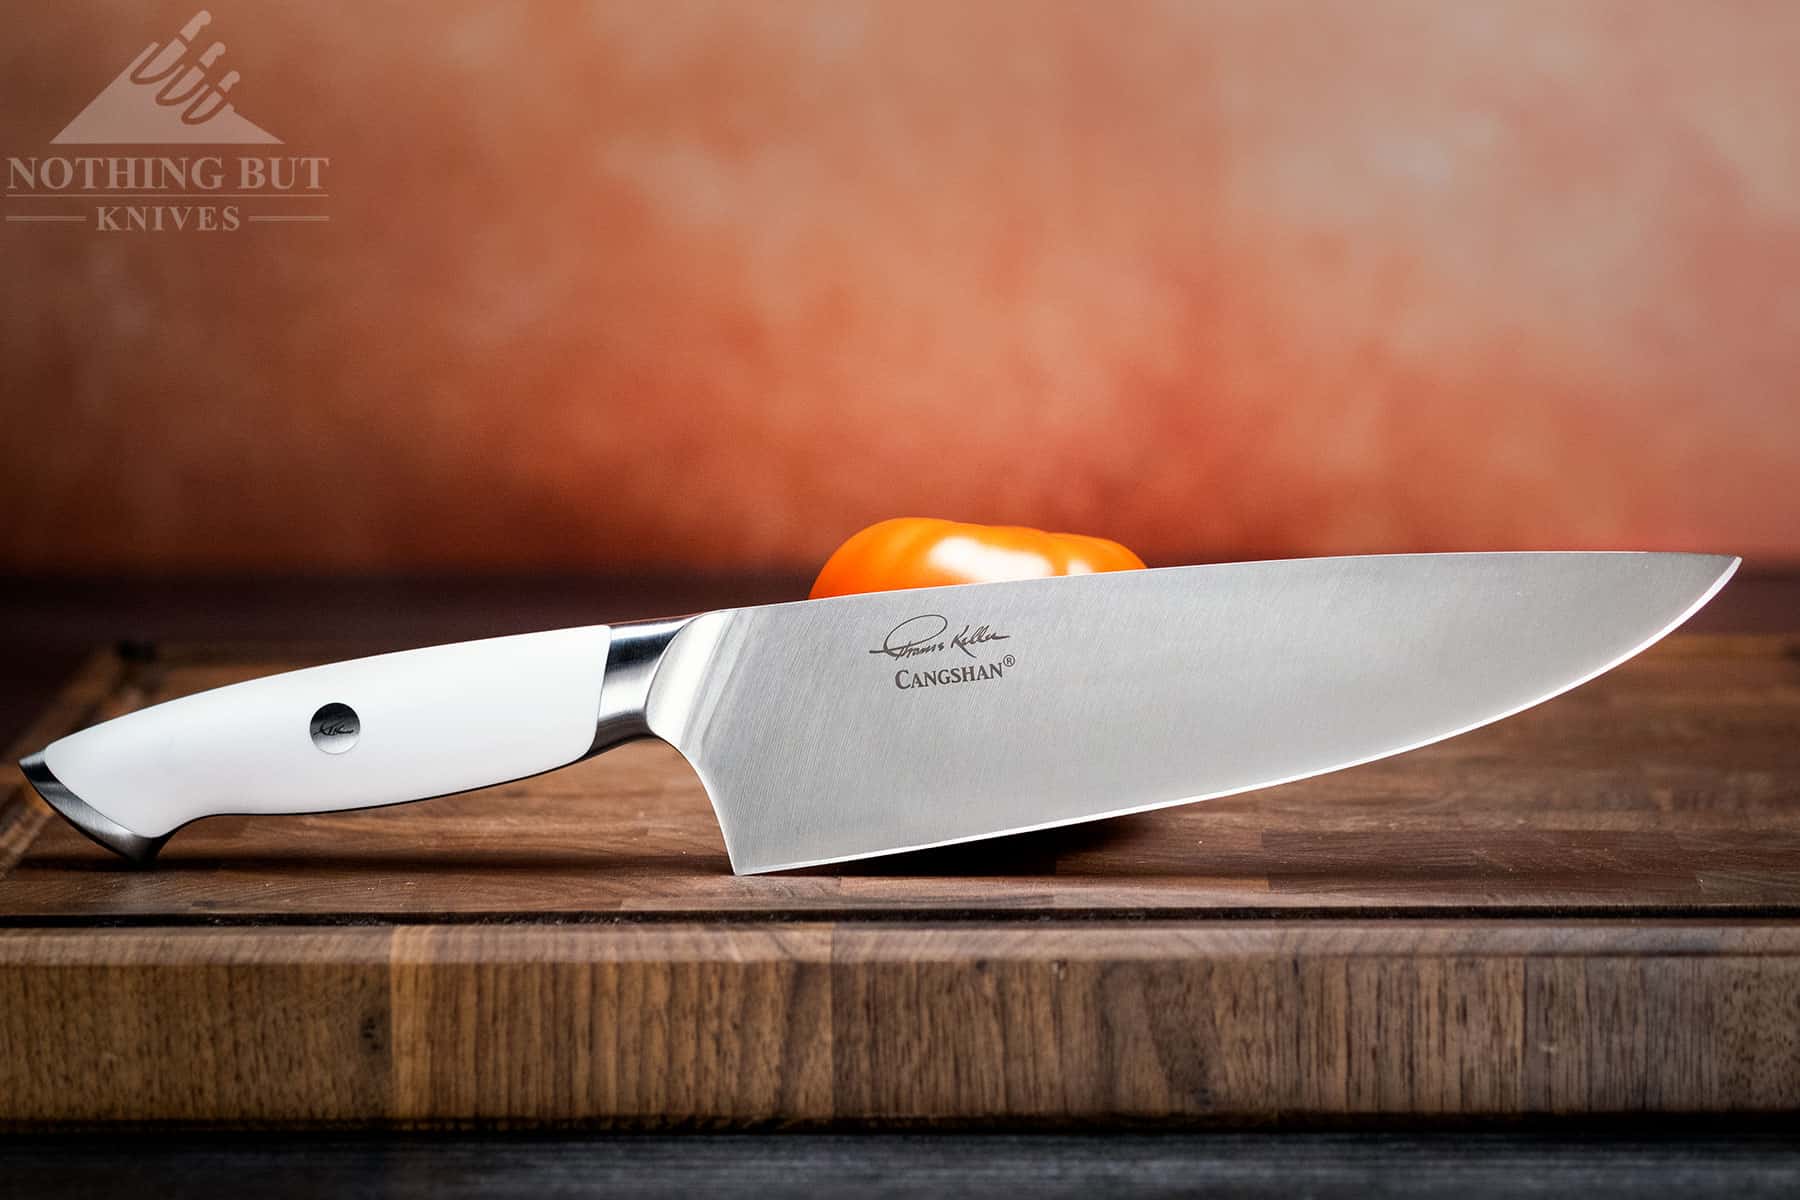 The Thomas Keller chef knife from Cangshan is one of the best Western style chef knives we have reviewed. 